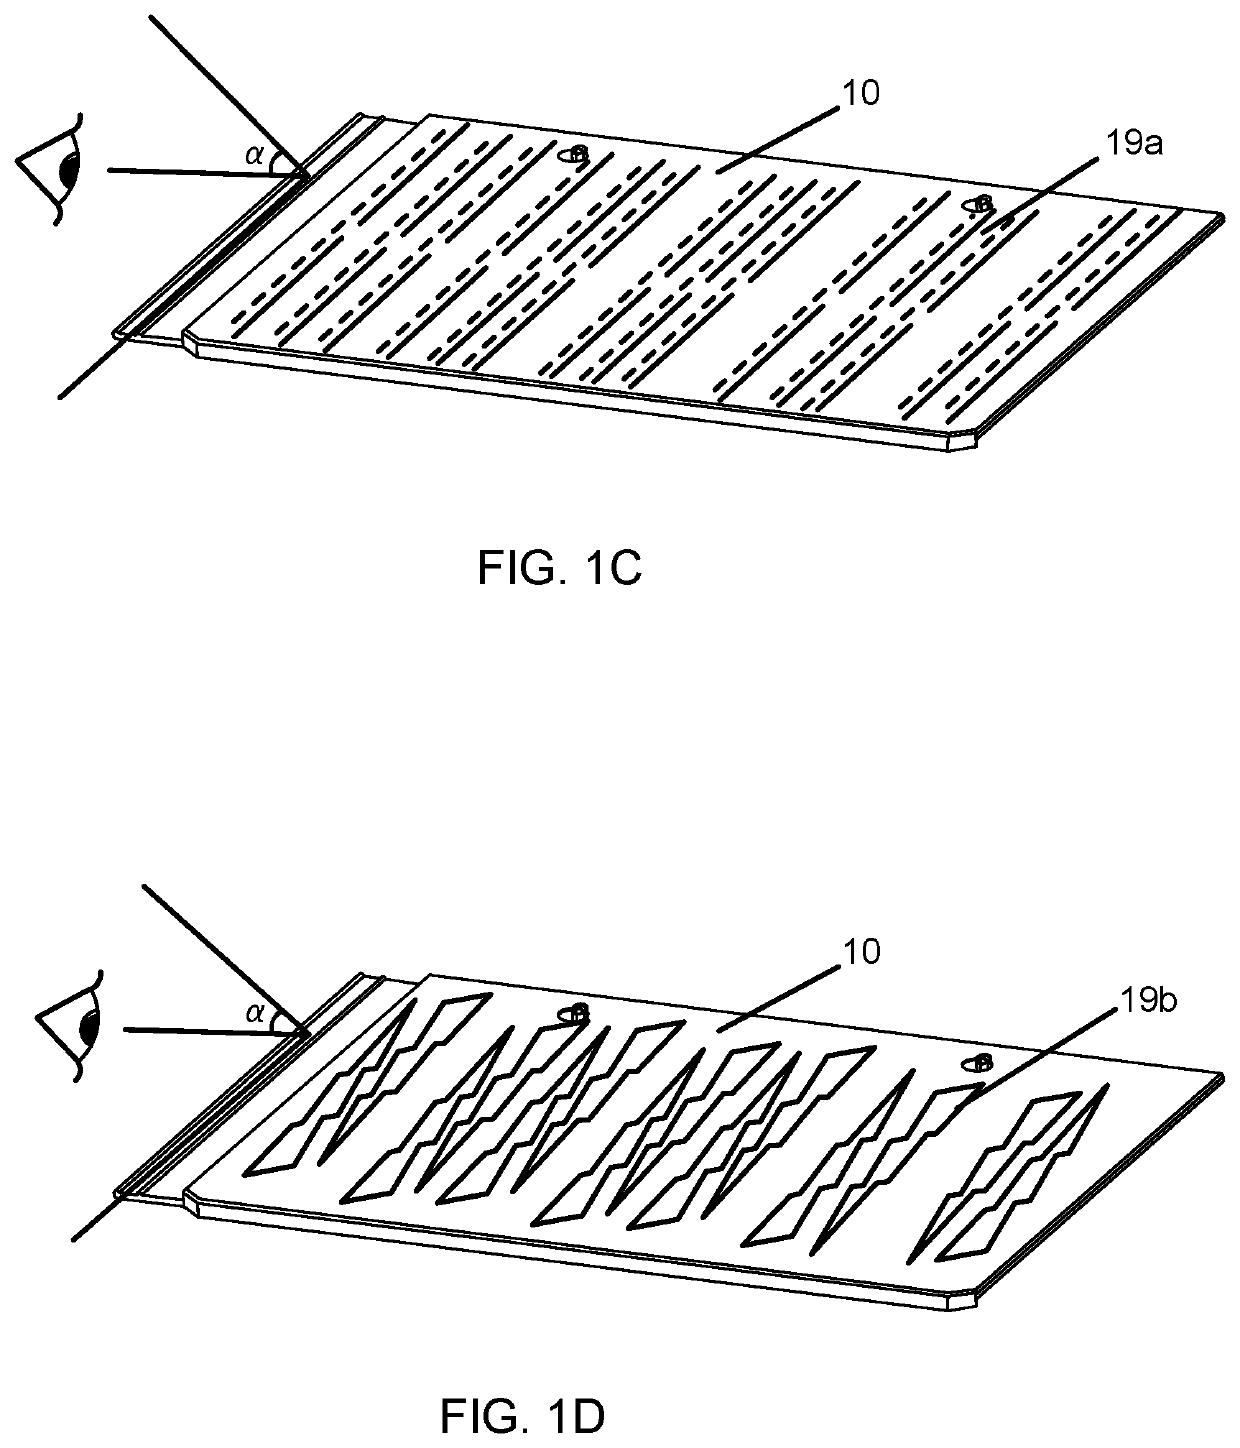 Building integrated photovoltaic system with glass photovoltaic tiles